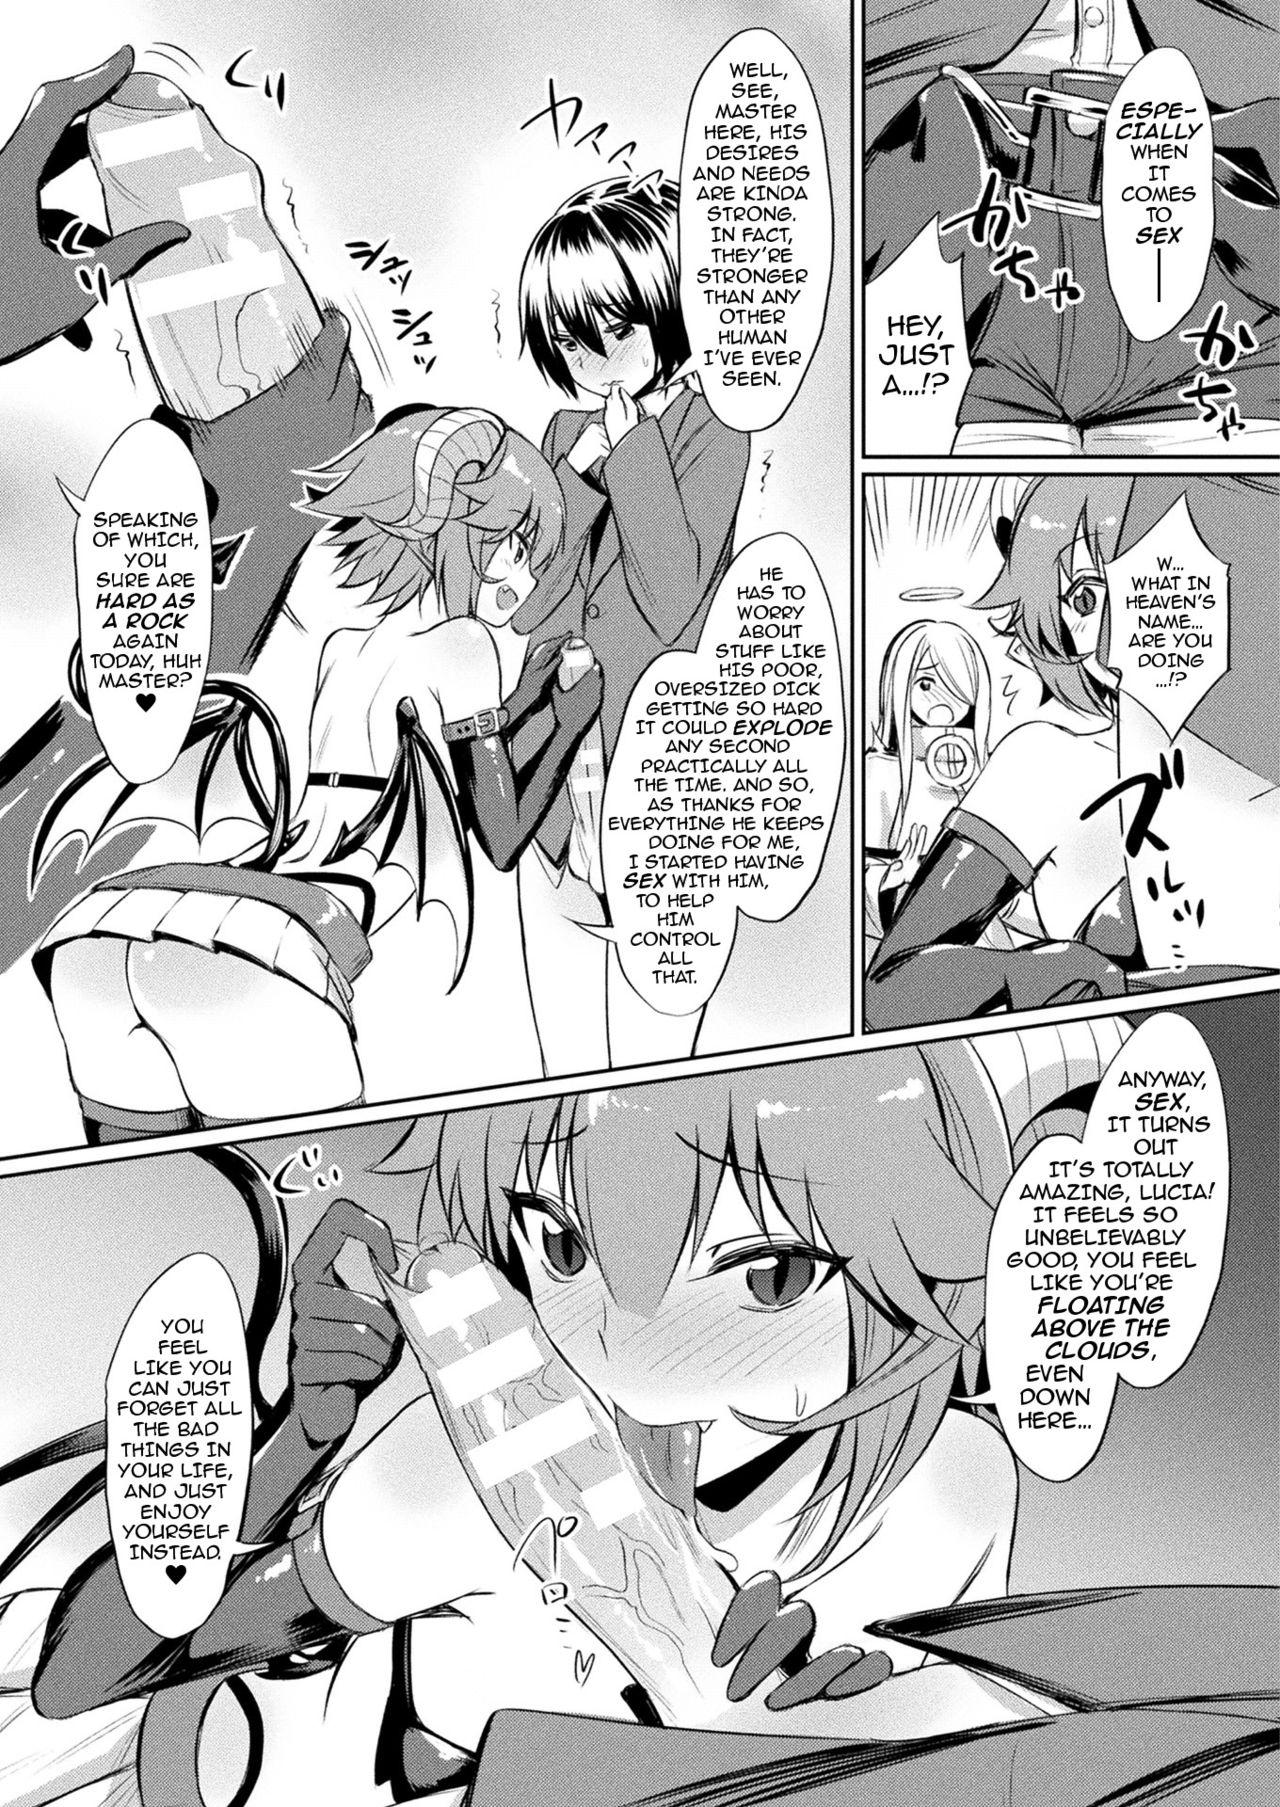 Urine Kimochii Rakuten Shiyo | Let’s Enjoy the Pleasures of FALLING FROM GRACE Together Leche - Page 5